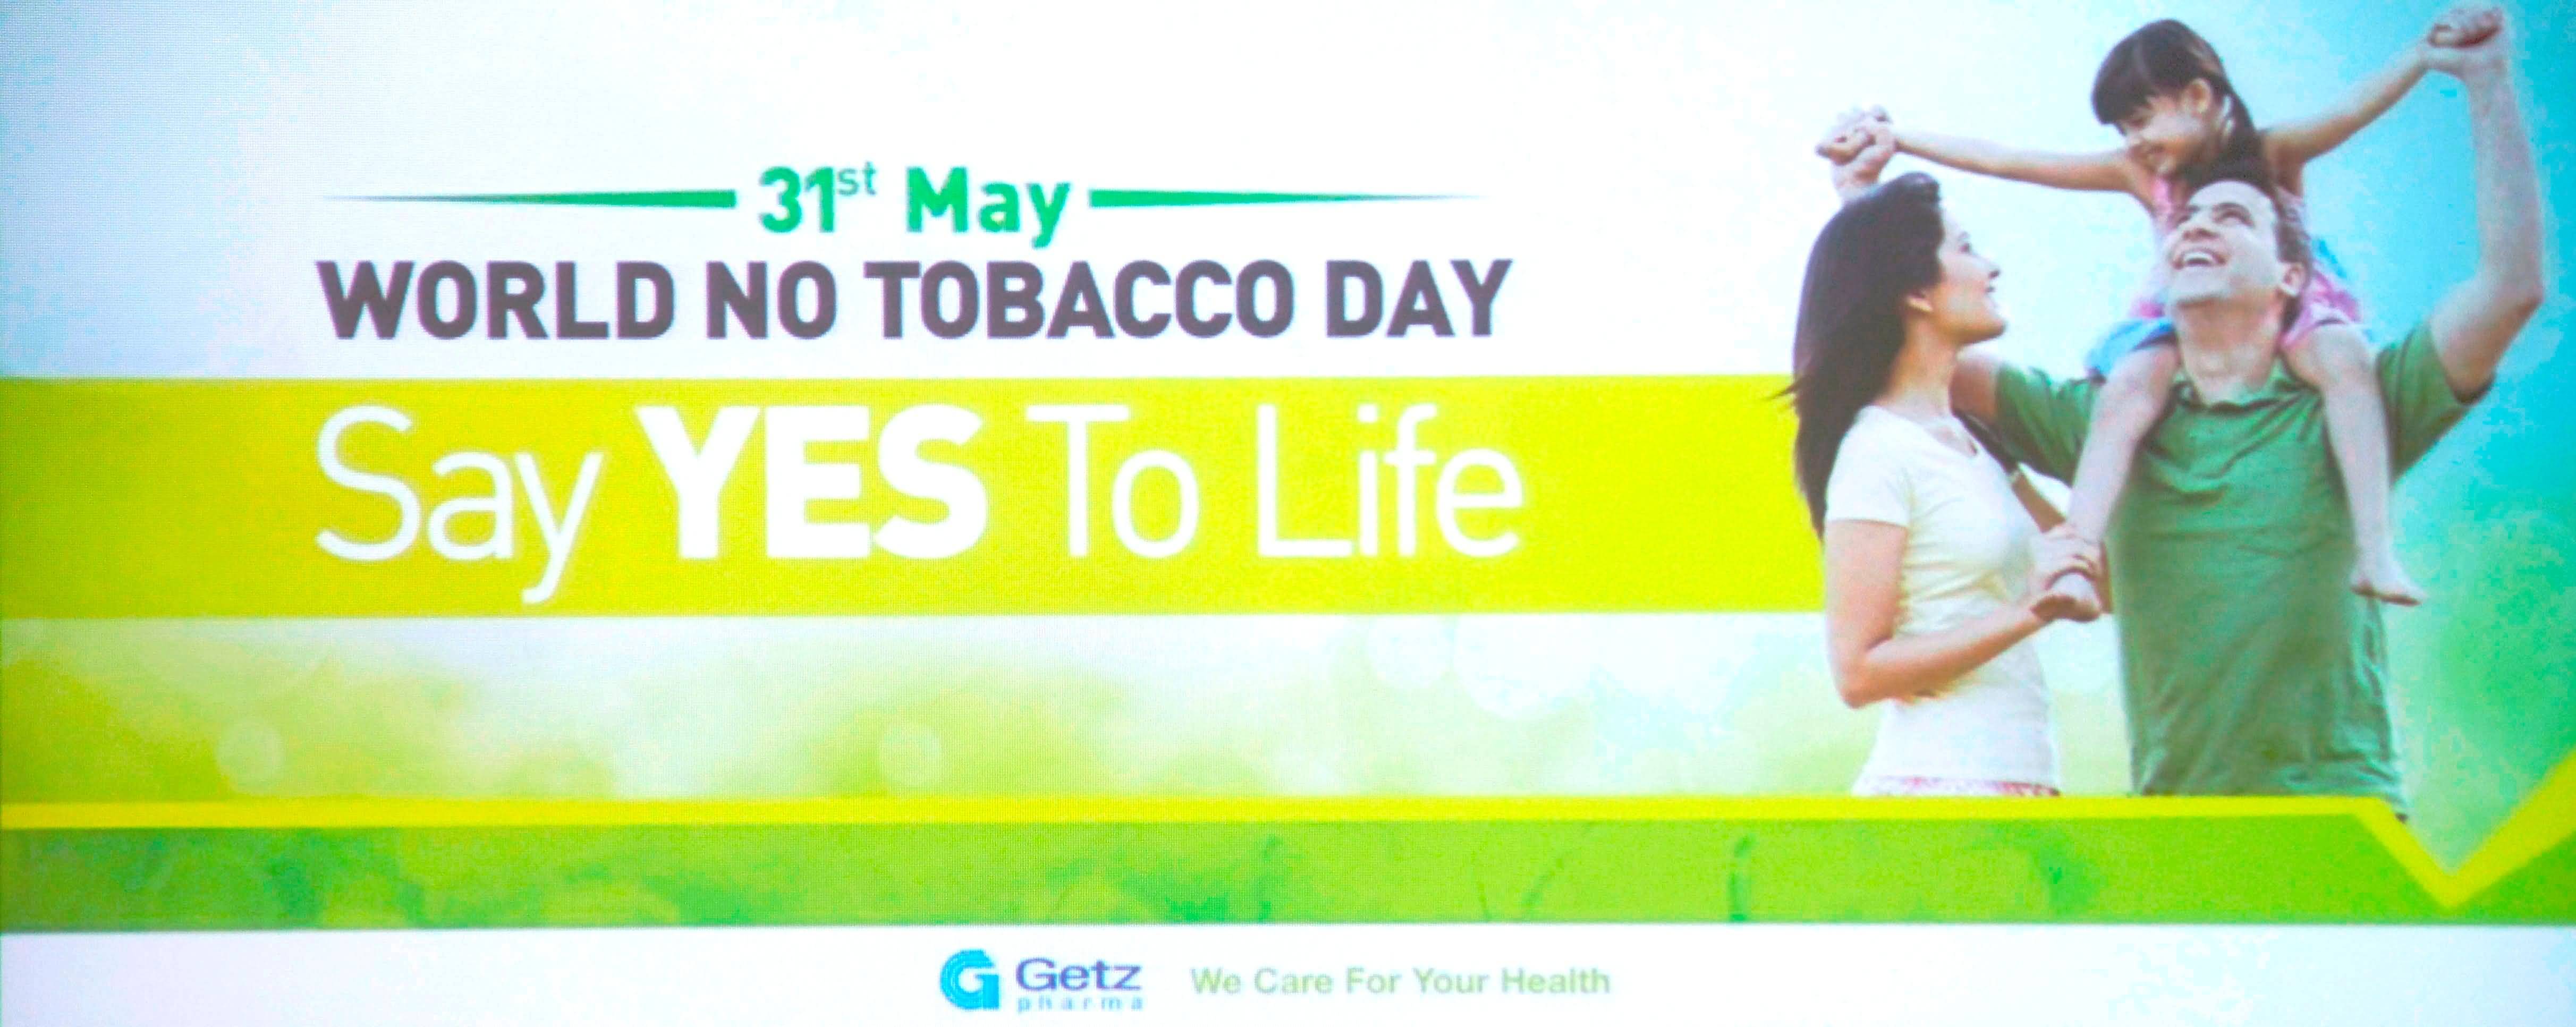 31st May World No Tobacco Day Say Yes To Life - World Anti Tobacco Day 2017 , HD Wallpaper & Backgrounds